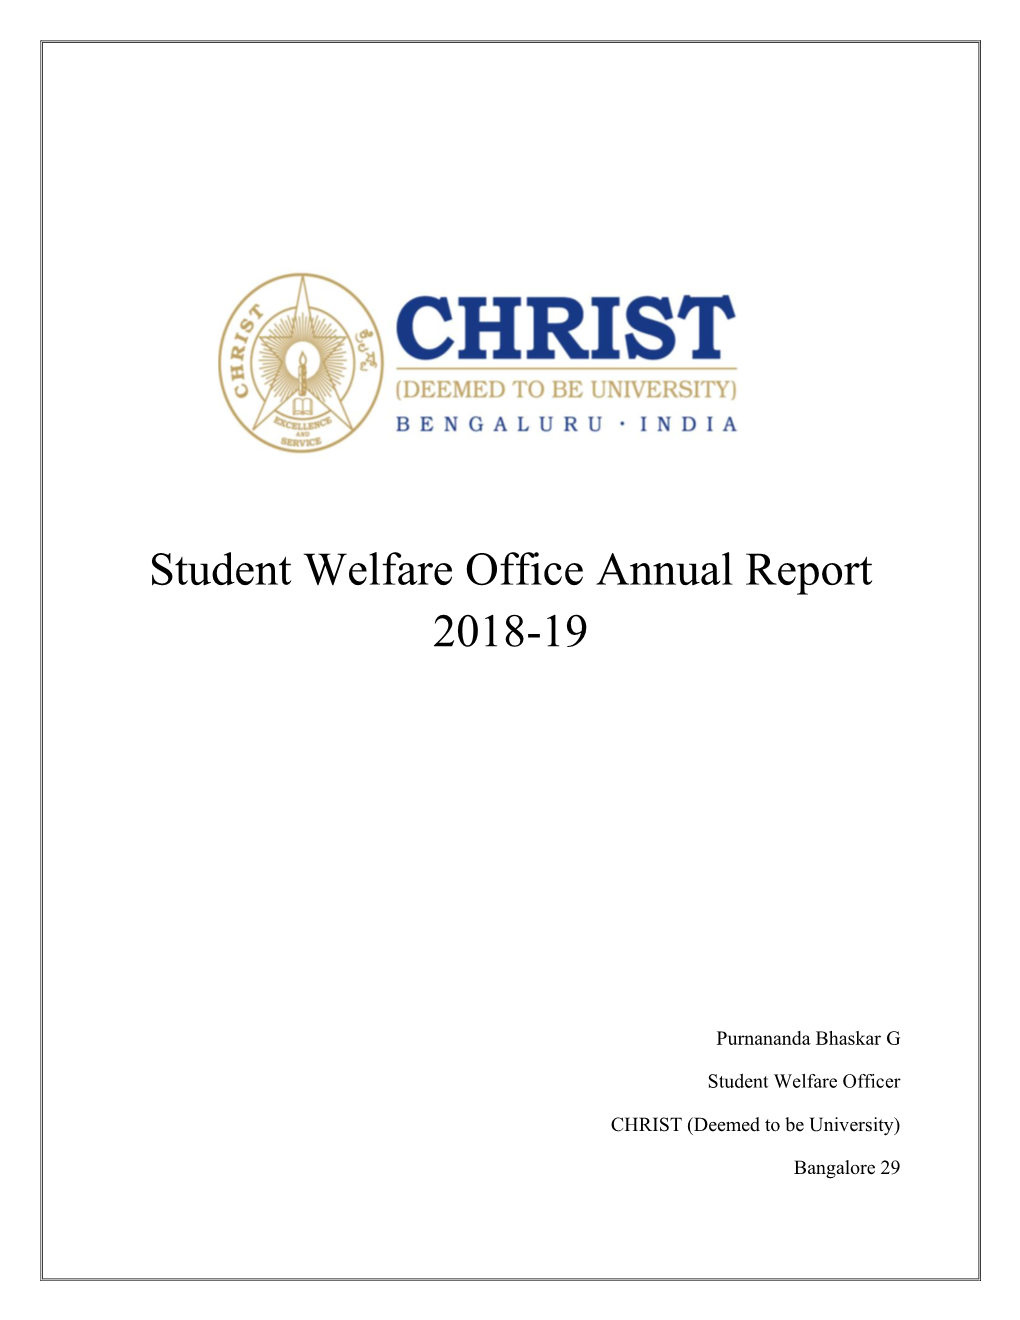 Student Welfare Office Annual Report 2018-19